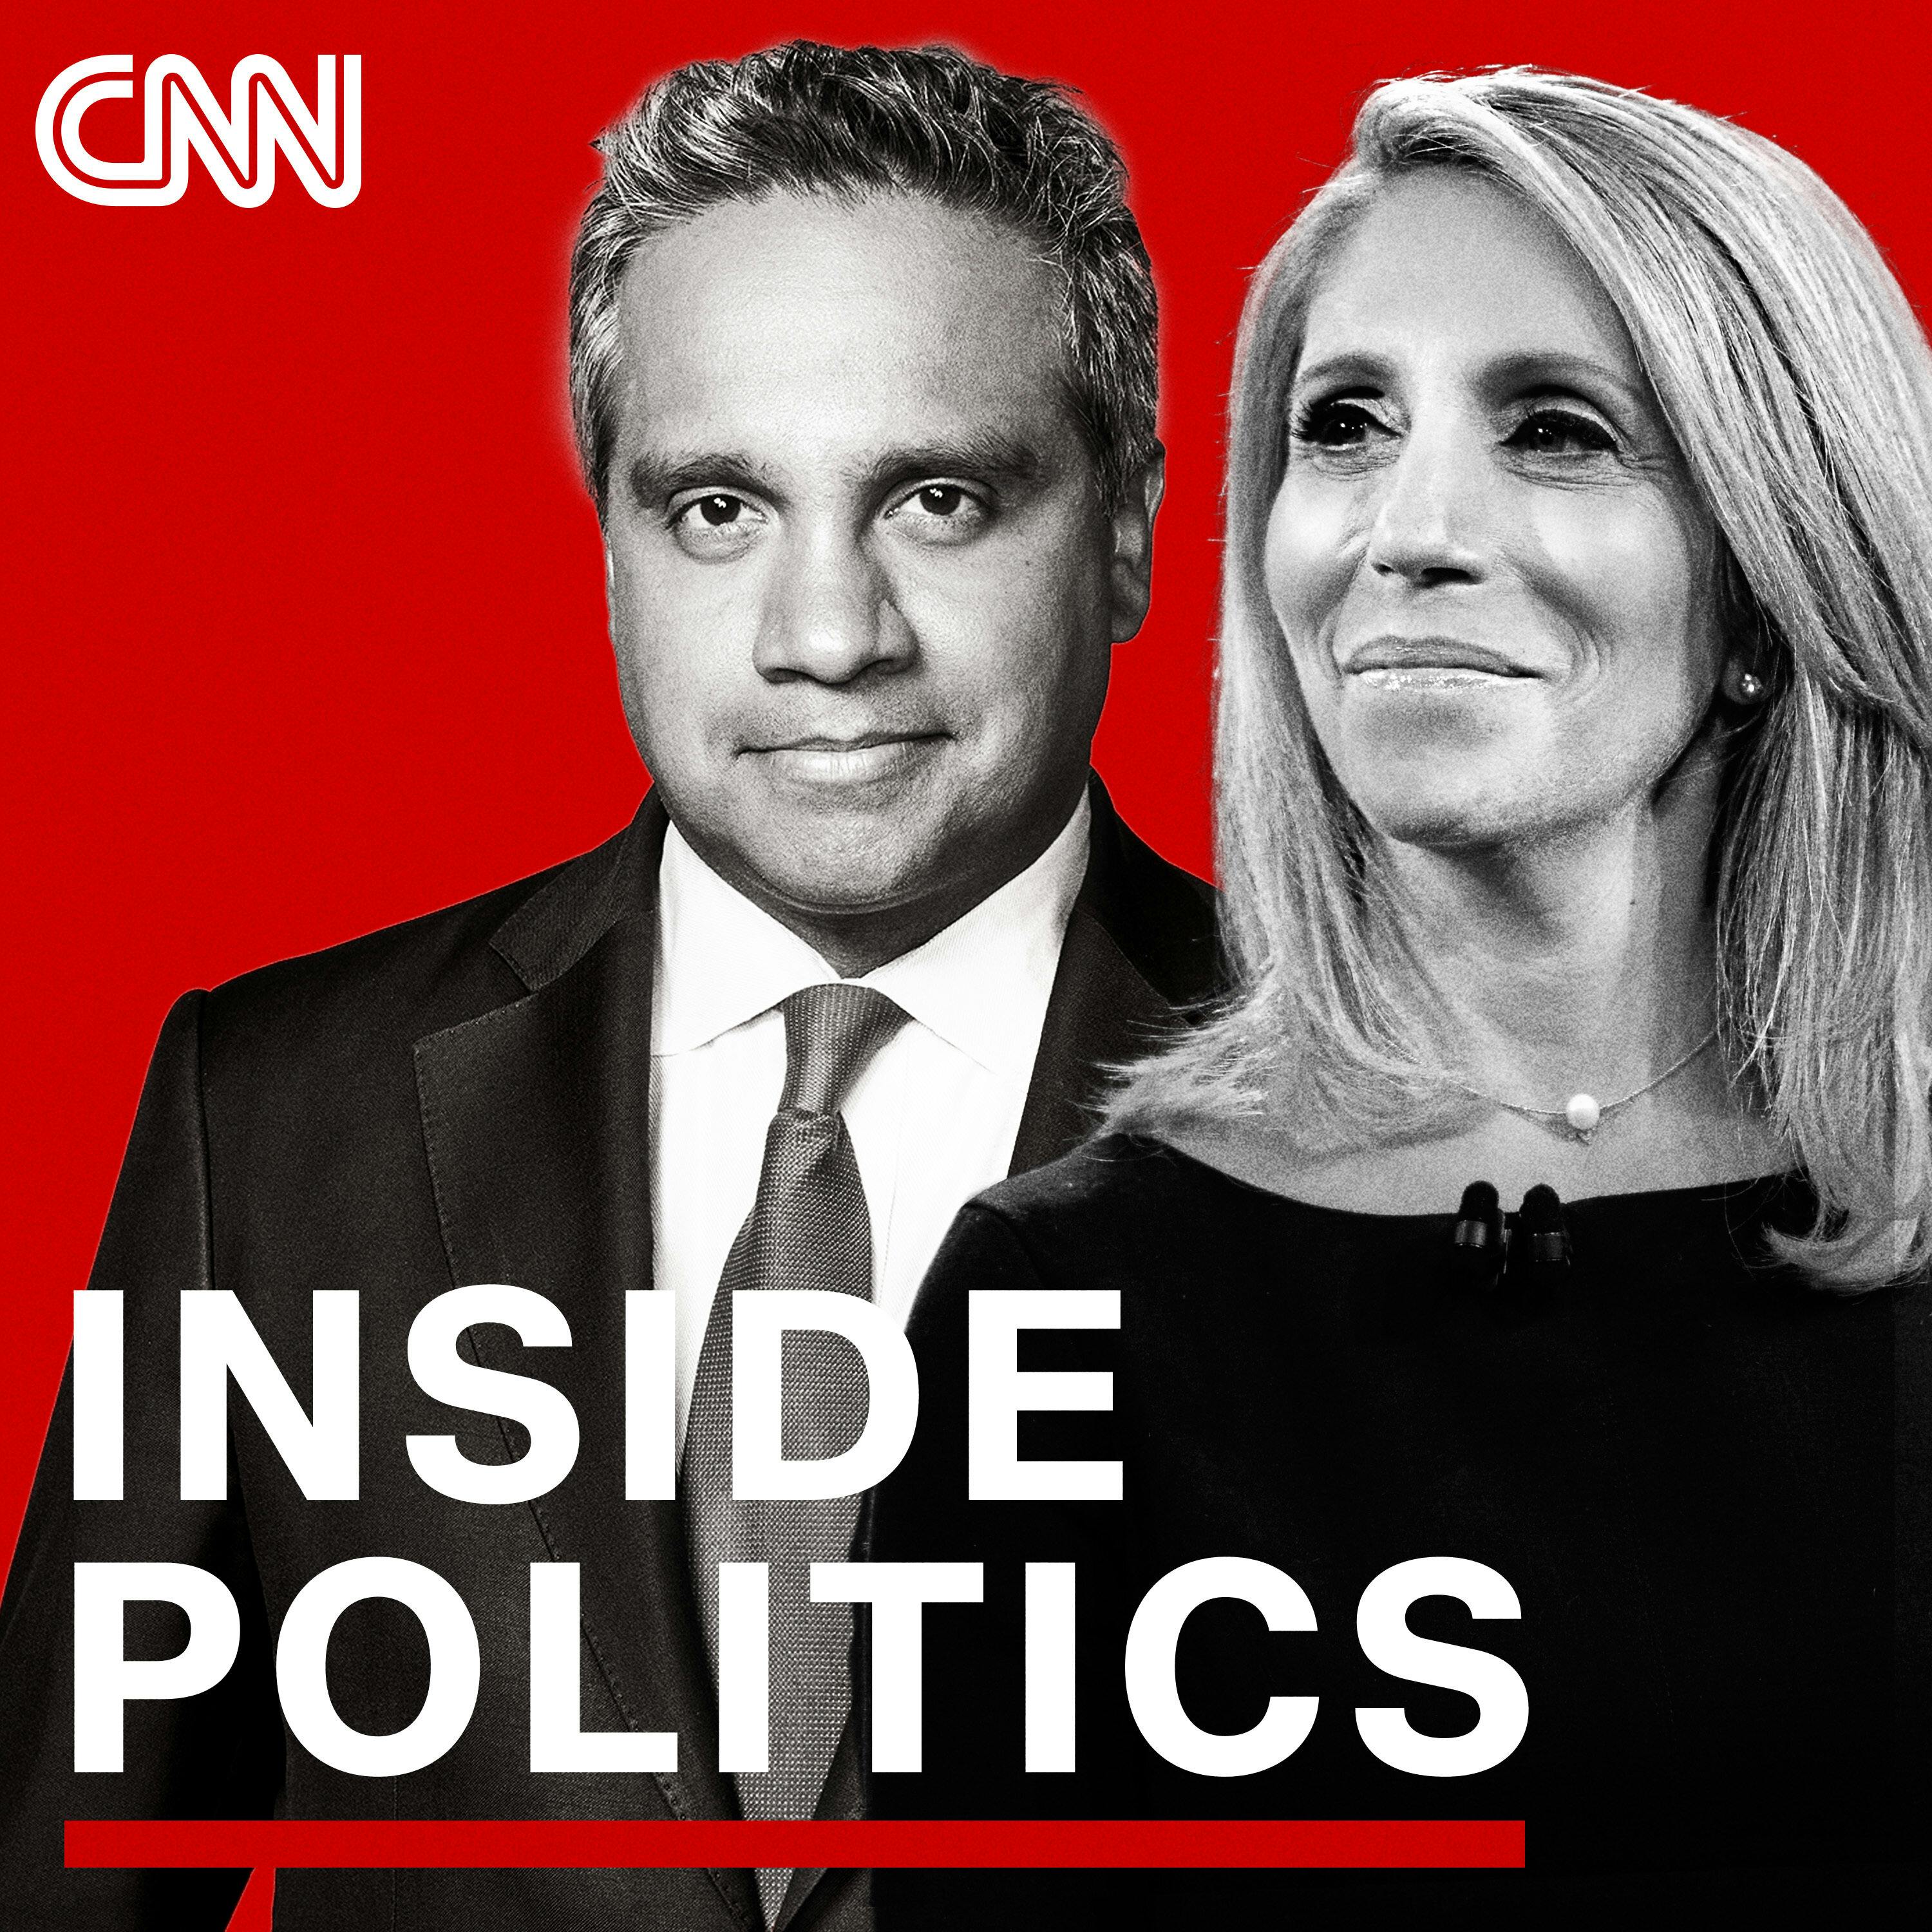 Inside Politics Podcast Update For Monday, August 30, 2021